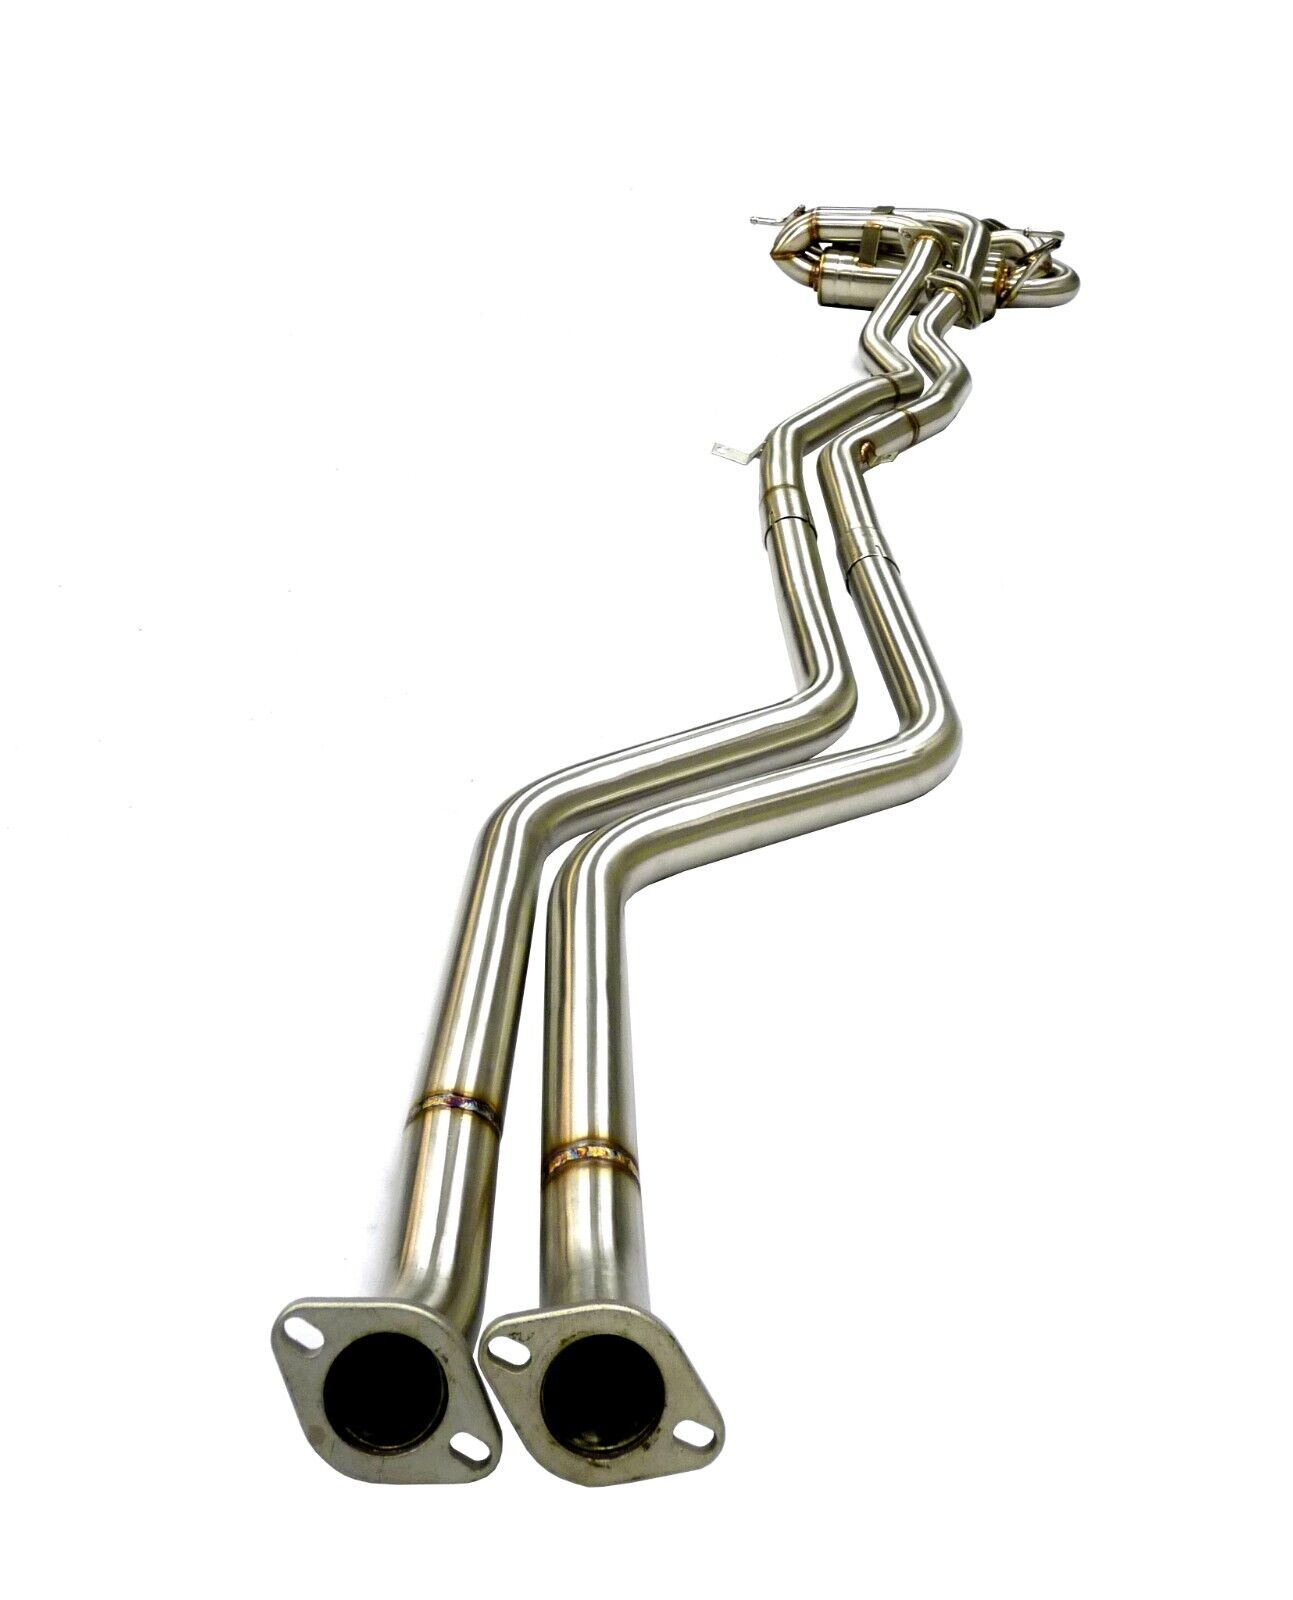 Catback Exhaust Compatible With 03-05 Z4 3.0L (Same Direc. Flanges) By Becker-P